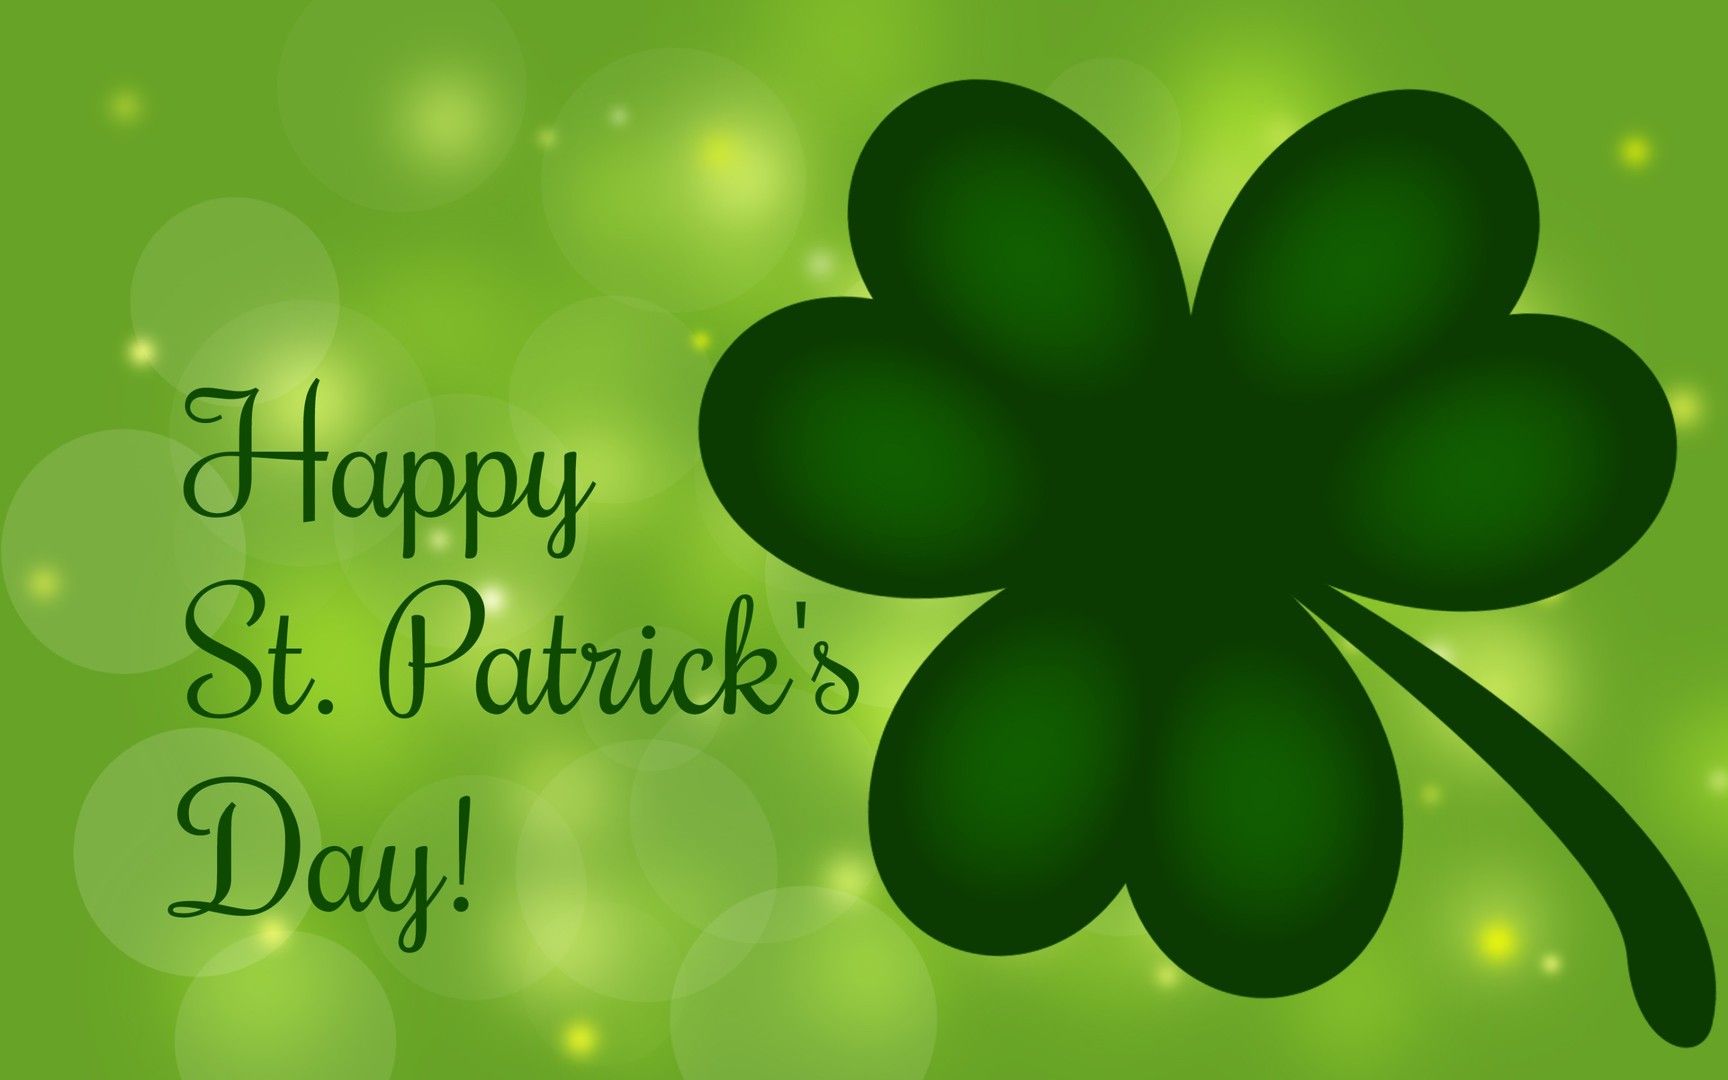 Happy St Patricks Day Image, Wallpaper, Quotes, Picture